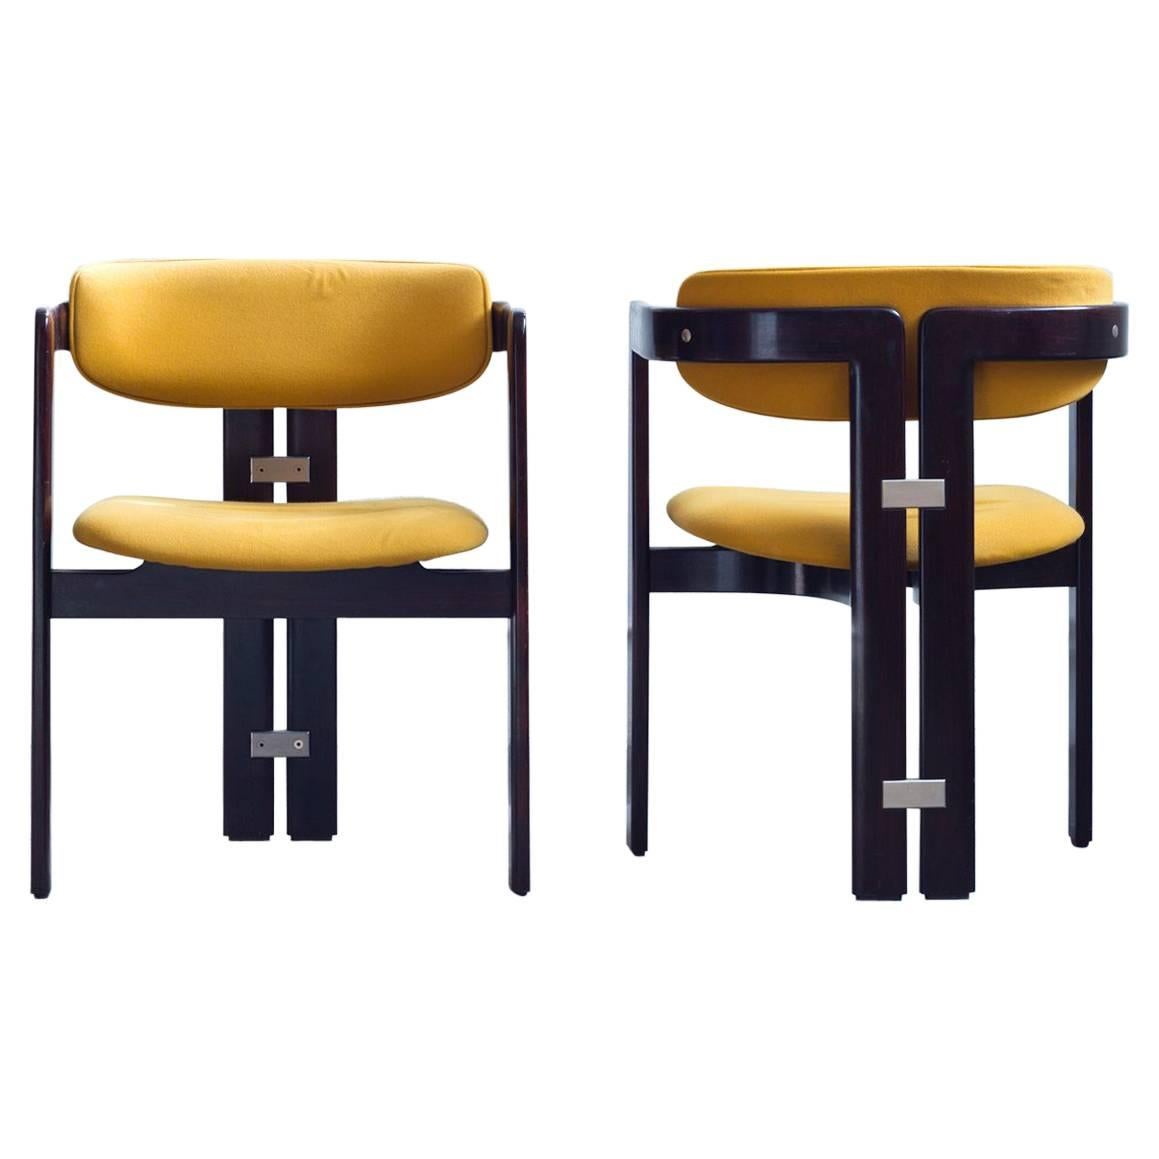 'Pamplona' chairs by Augusto Savini for Pozzi